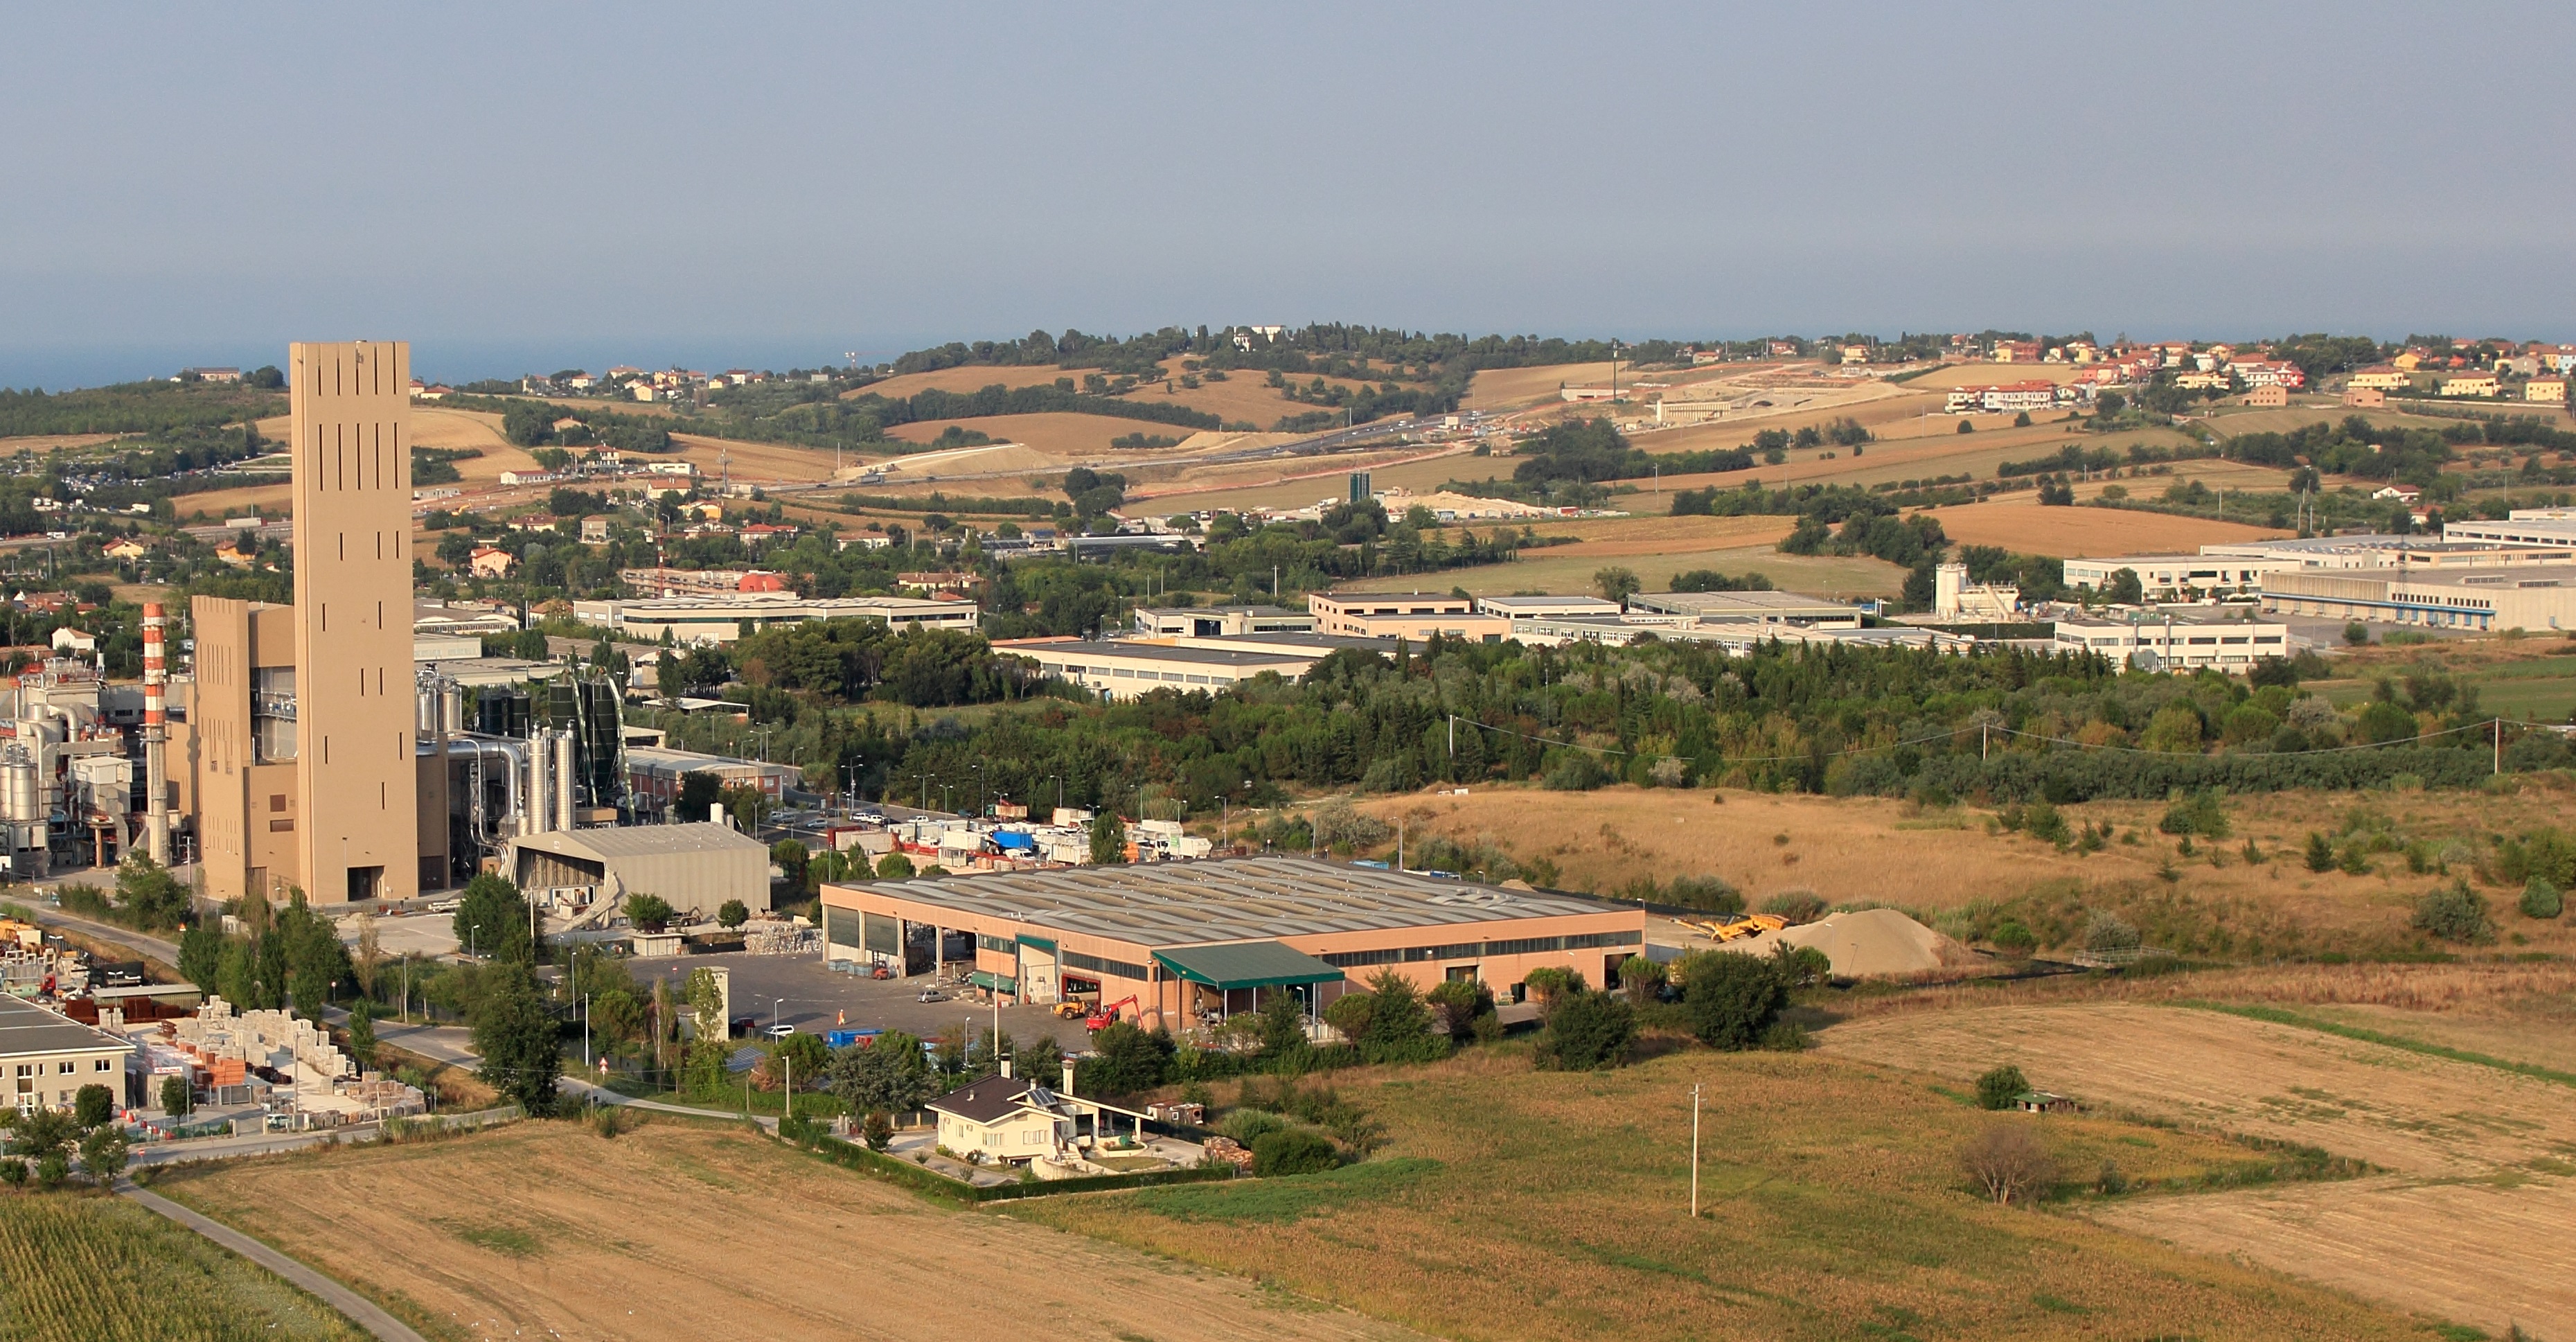 View of Waste-to-energy plant in Rimini